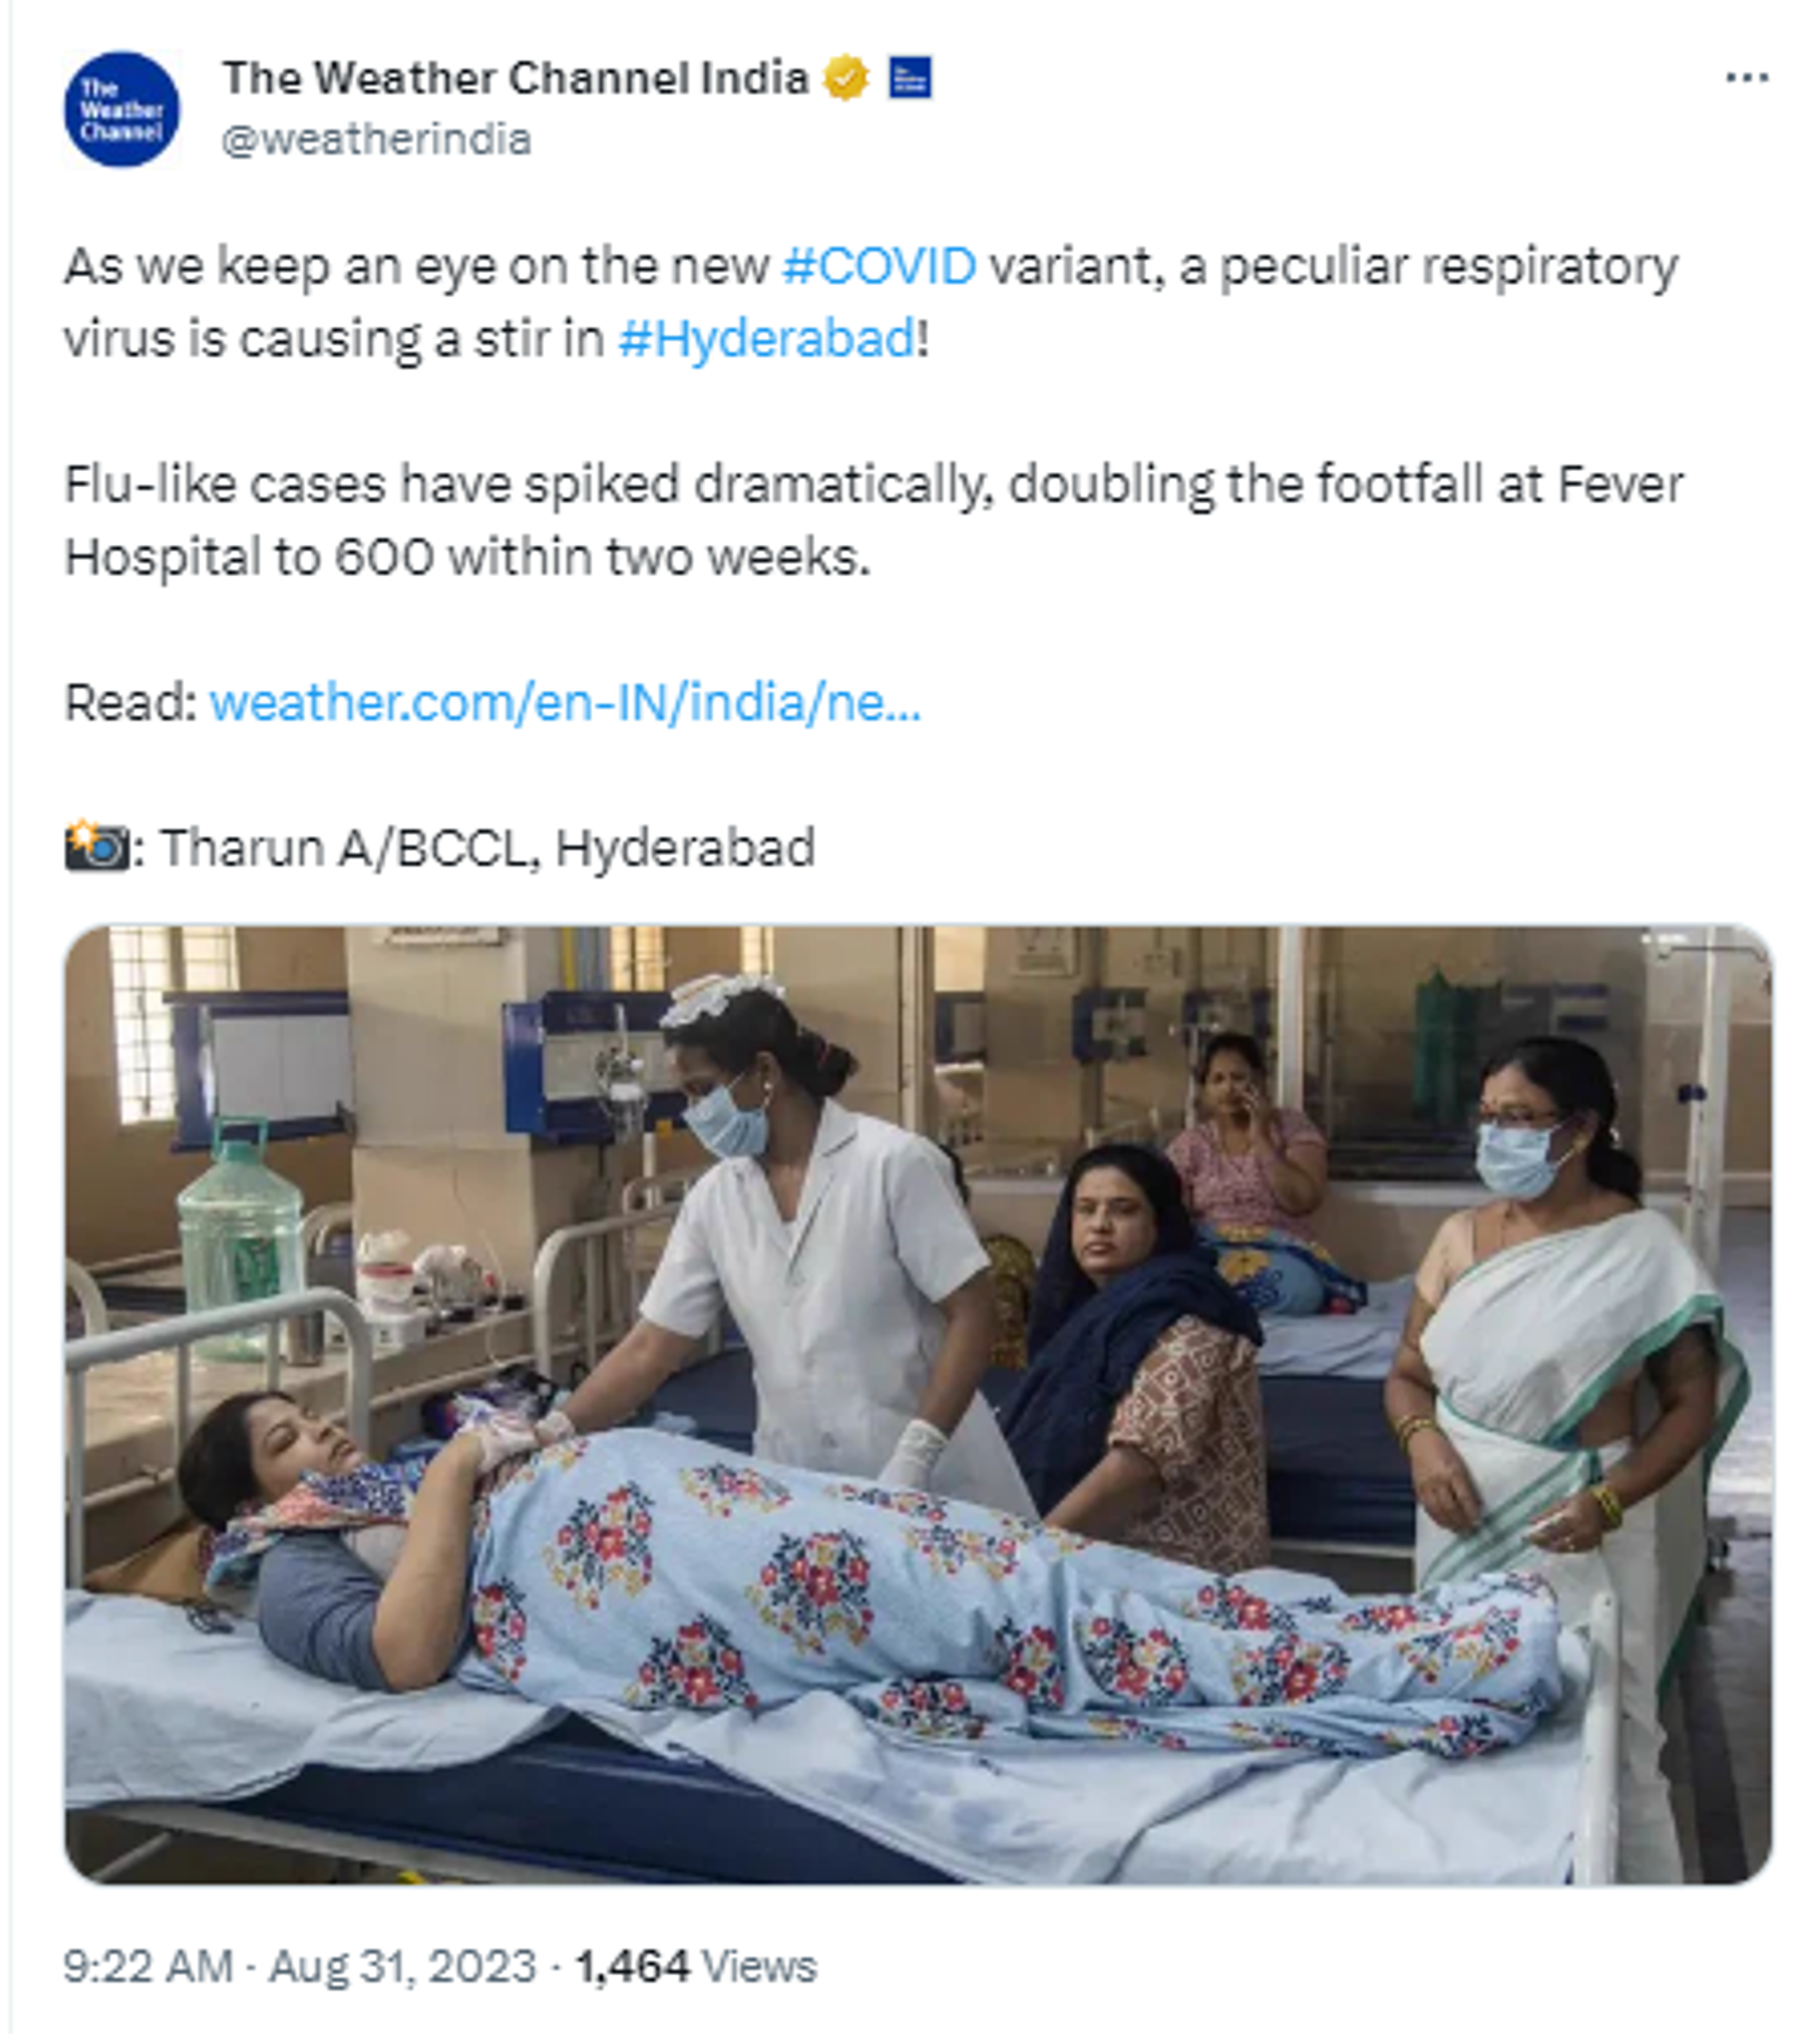 Hyderabad Reports Spike in Mysterious Respiratory Virus Cases - Sputnik India, 1920, 02.09.2023